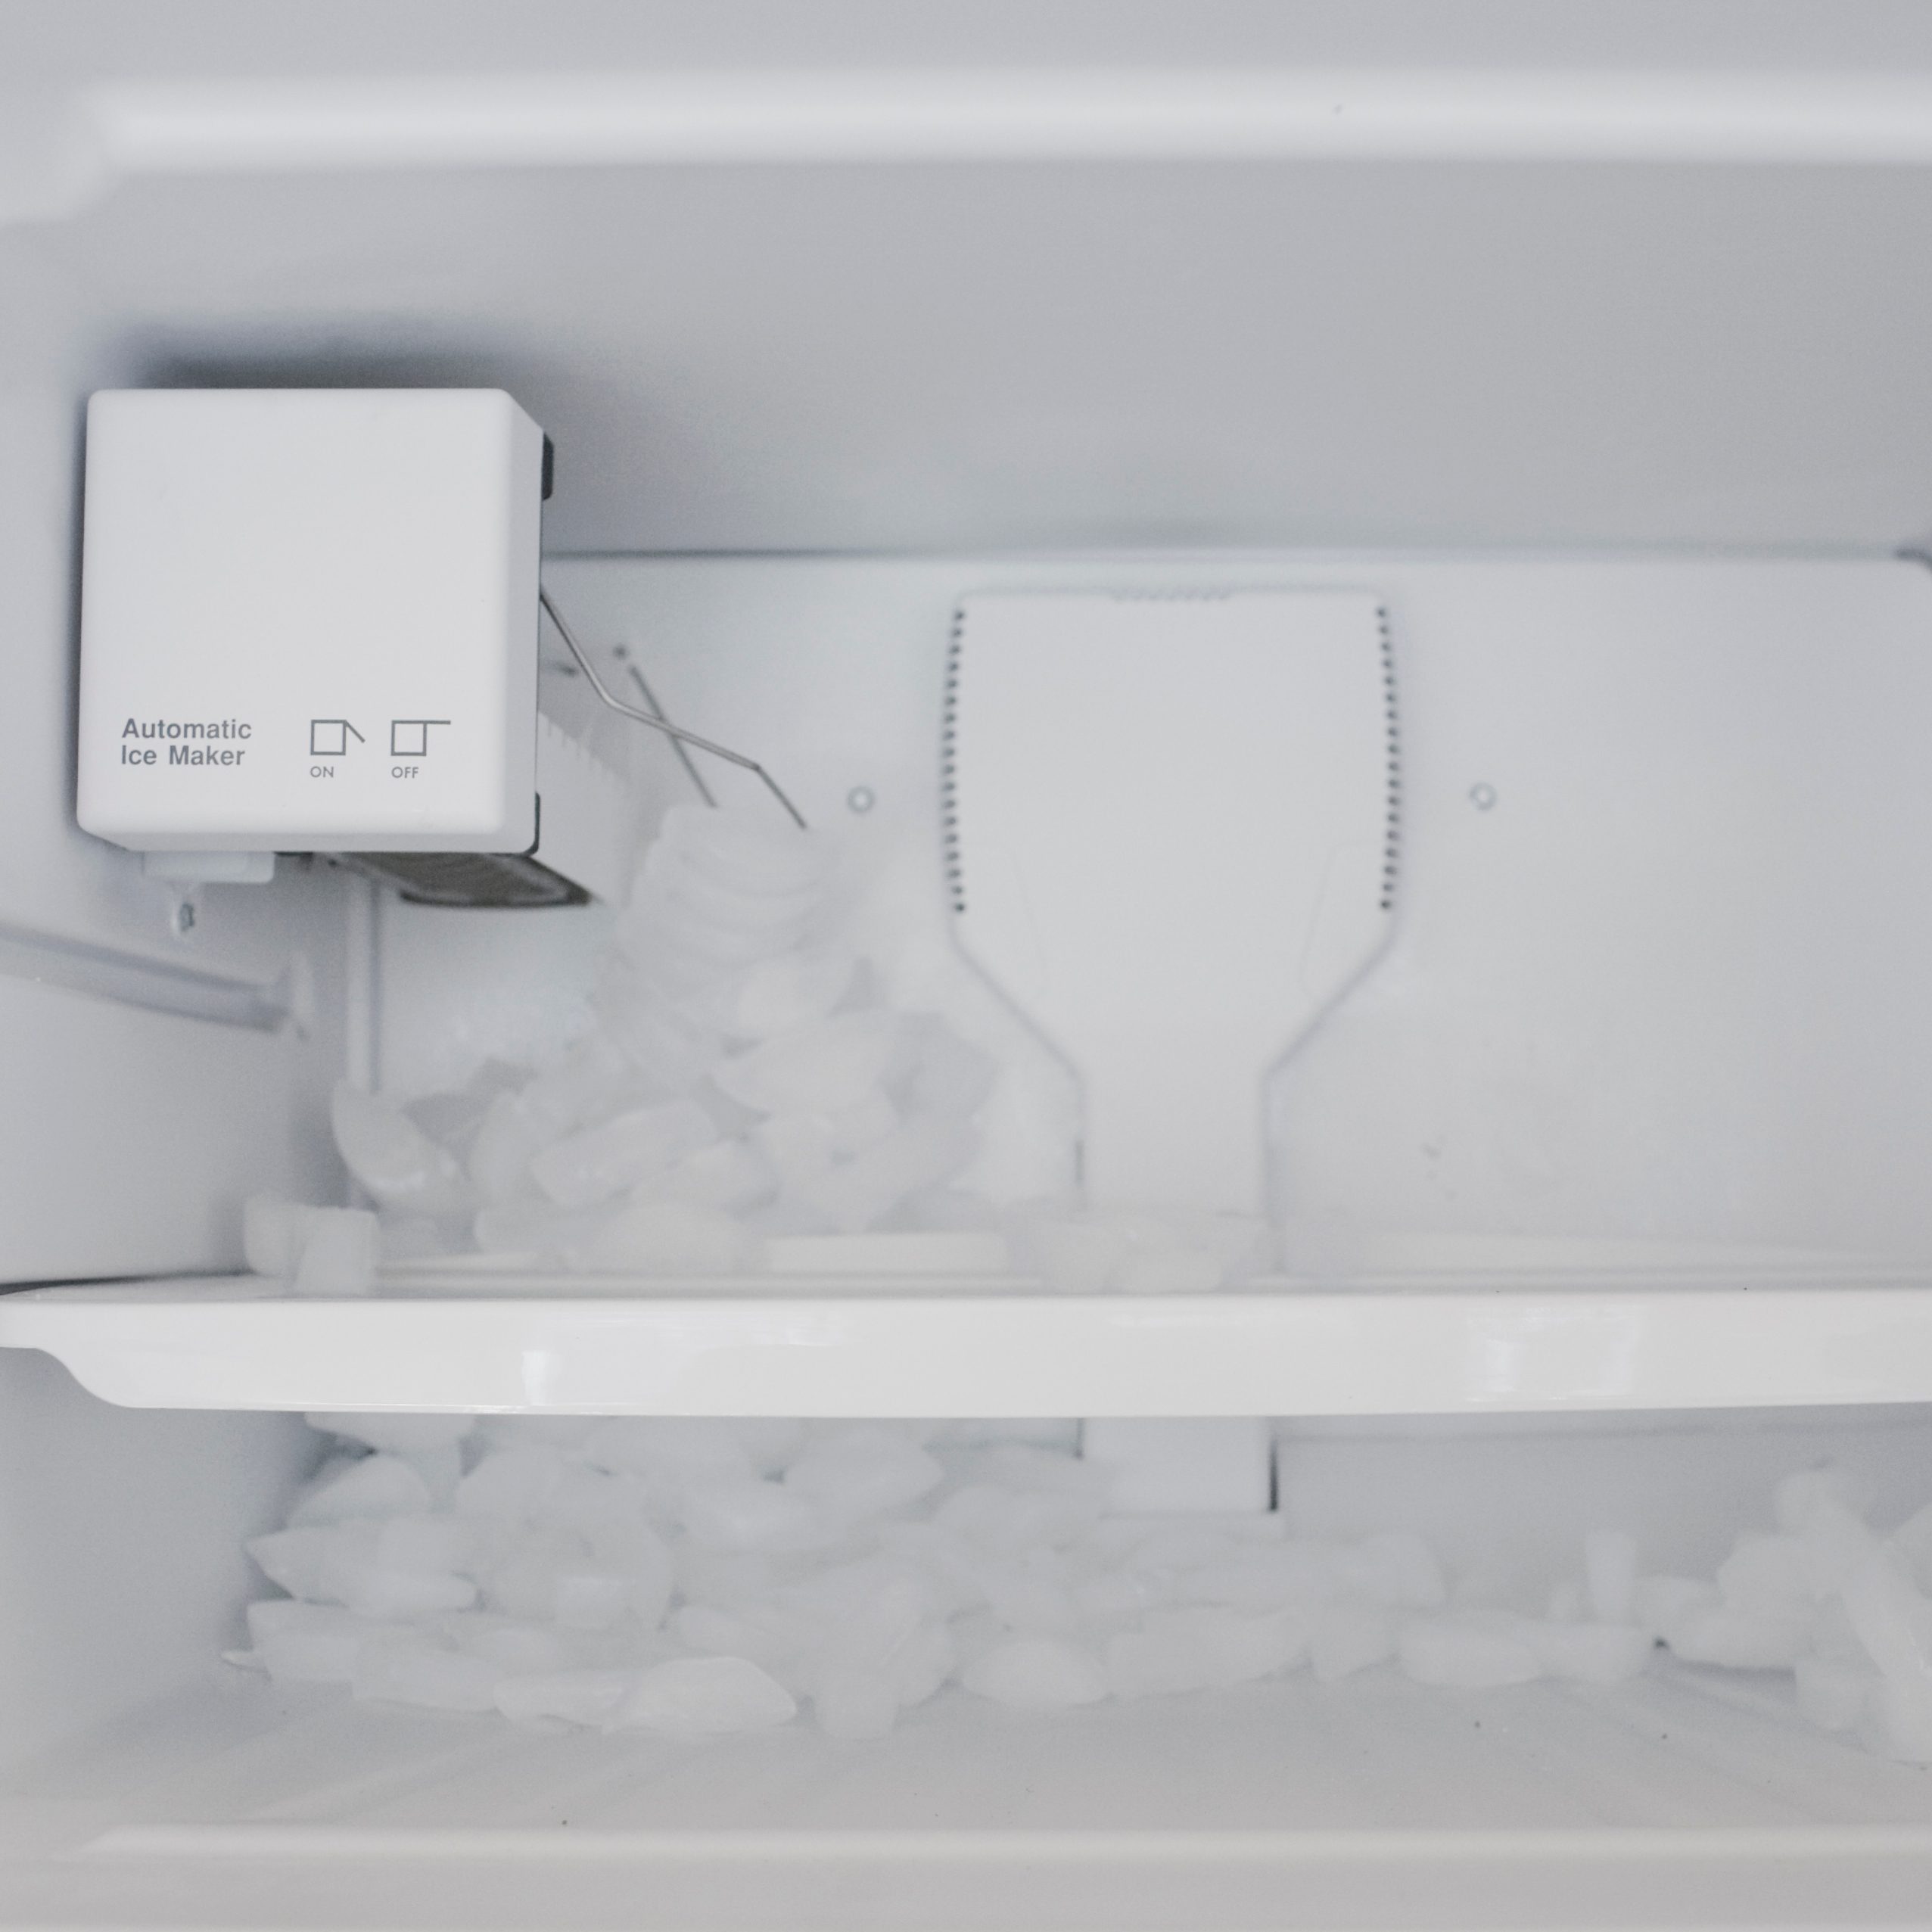 spilling ice in freezer